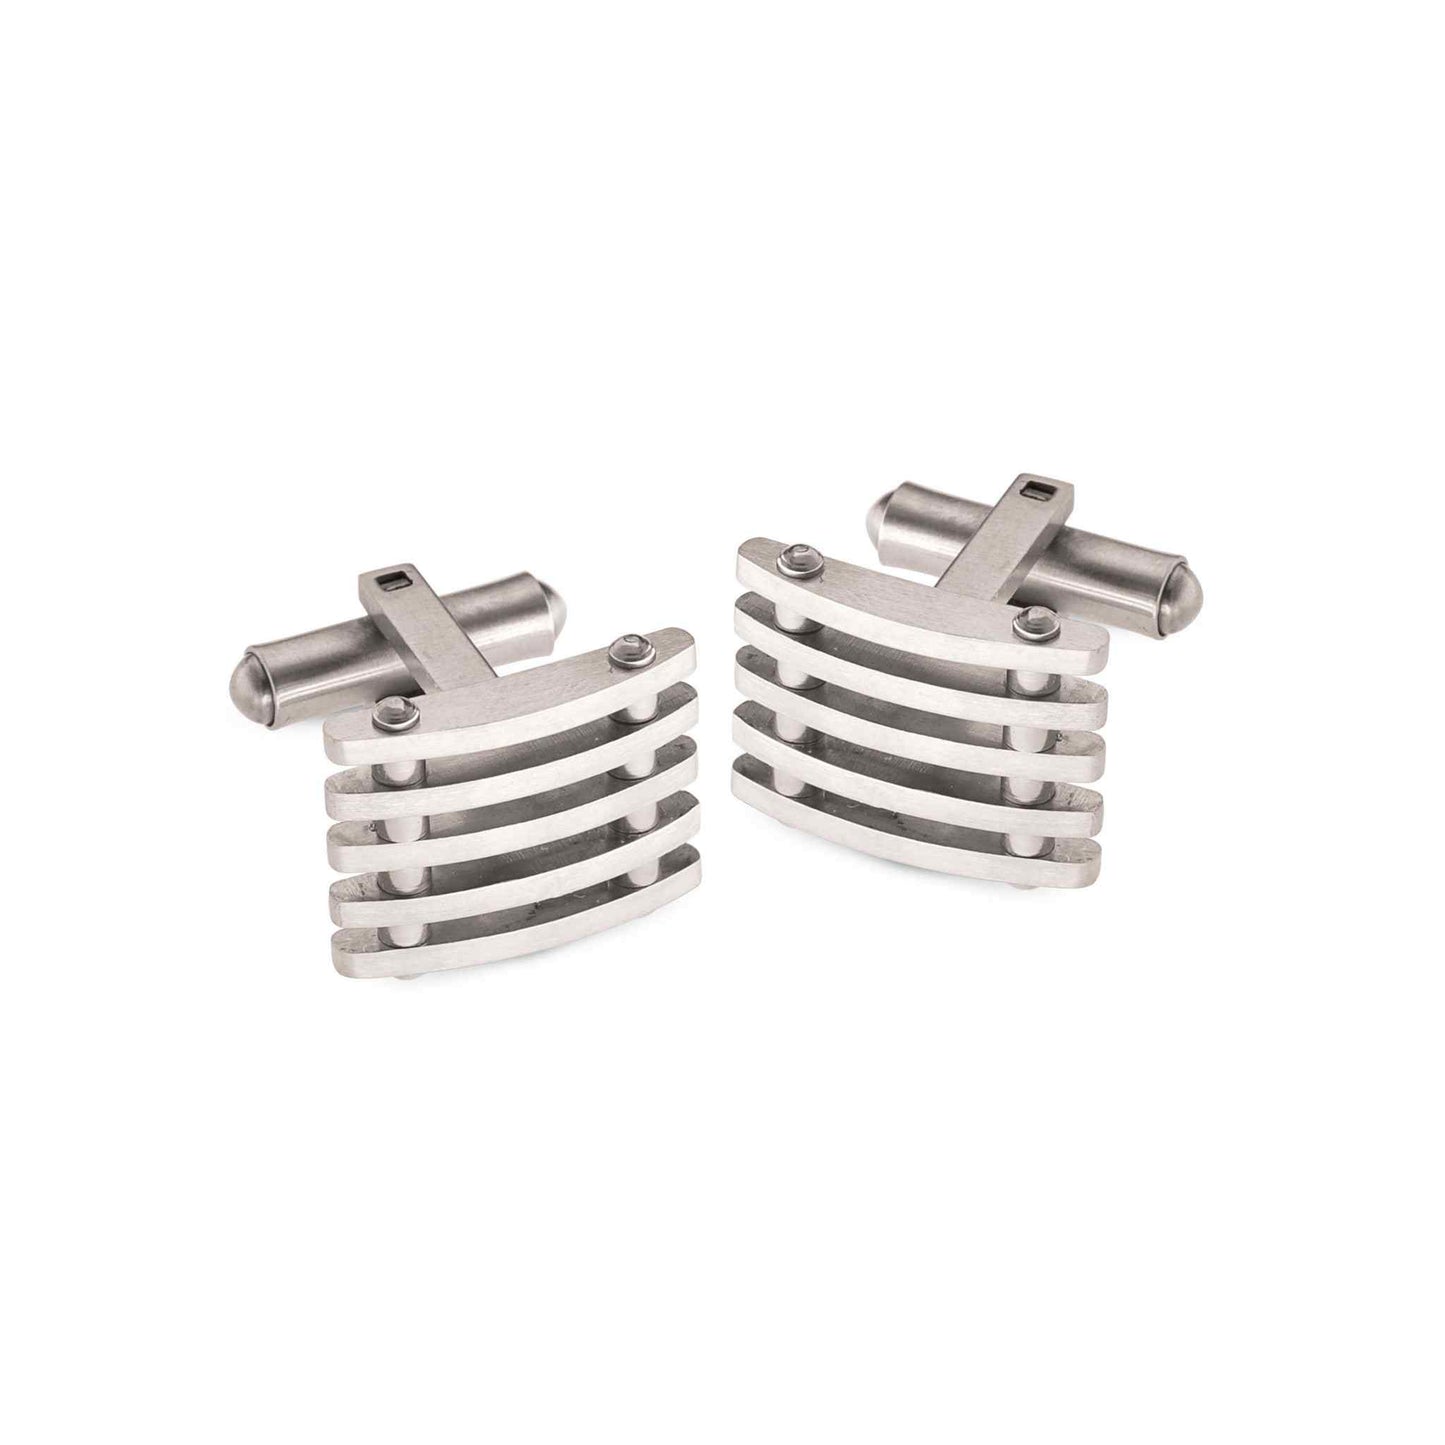 A stainless steel cufflinks with slats displayed on a neutral white background.